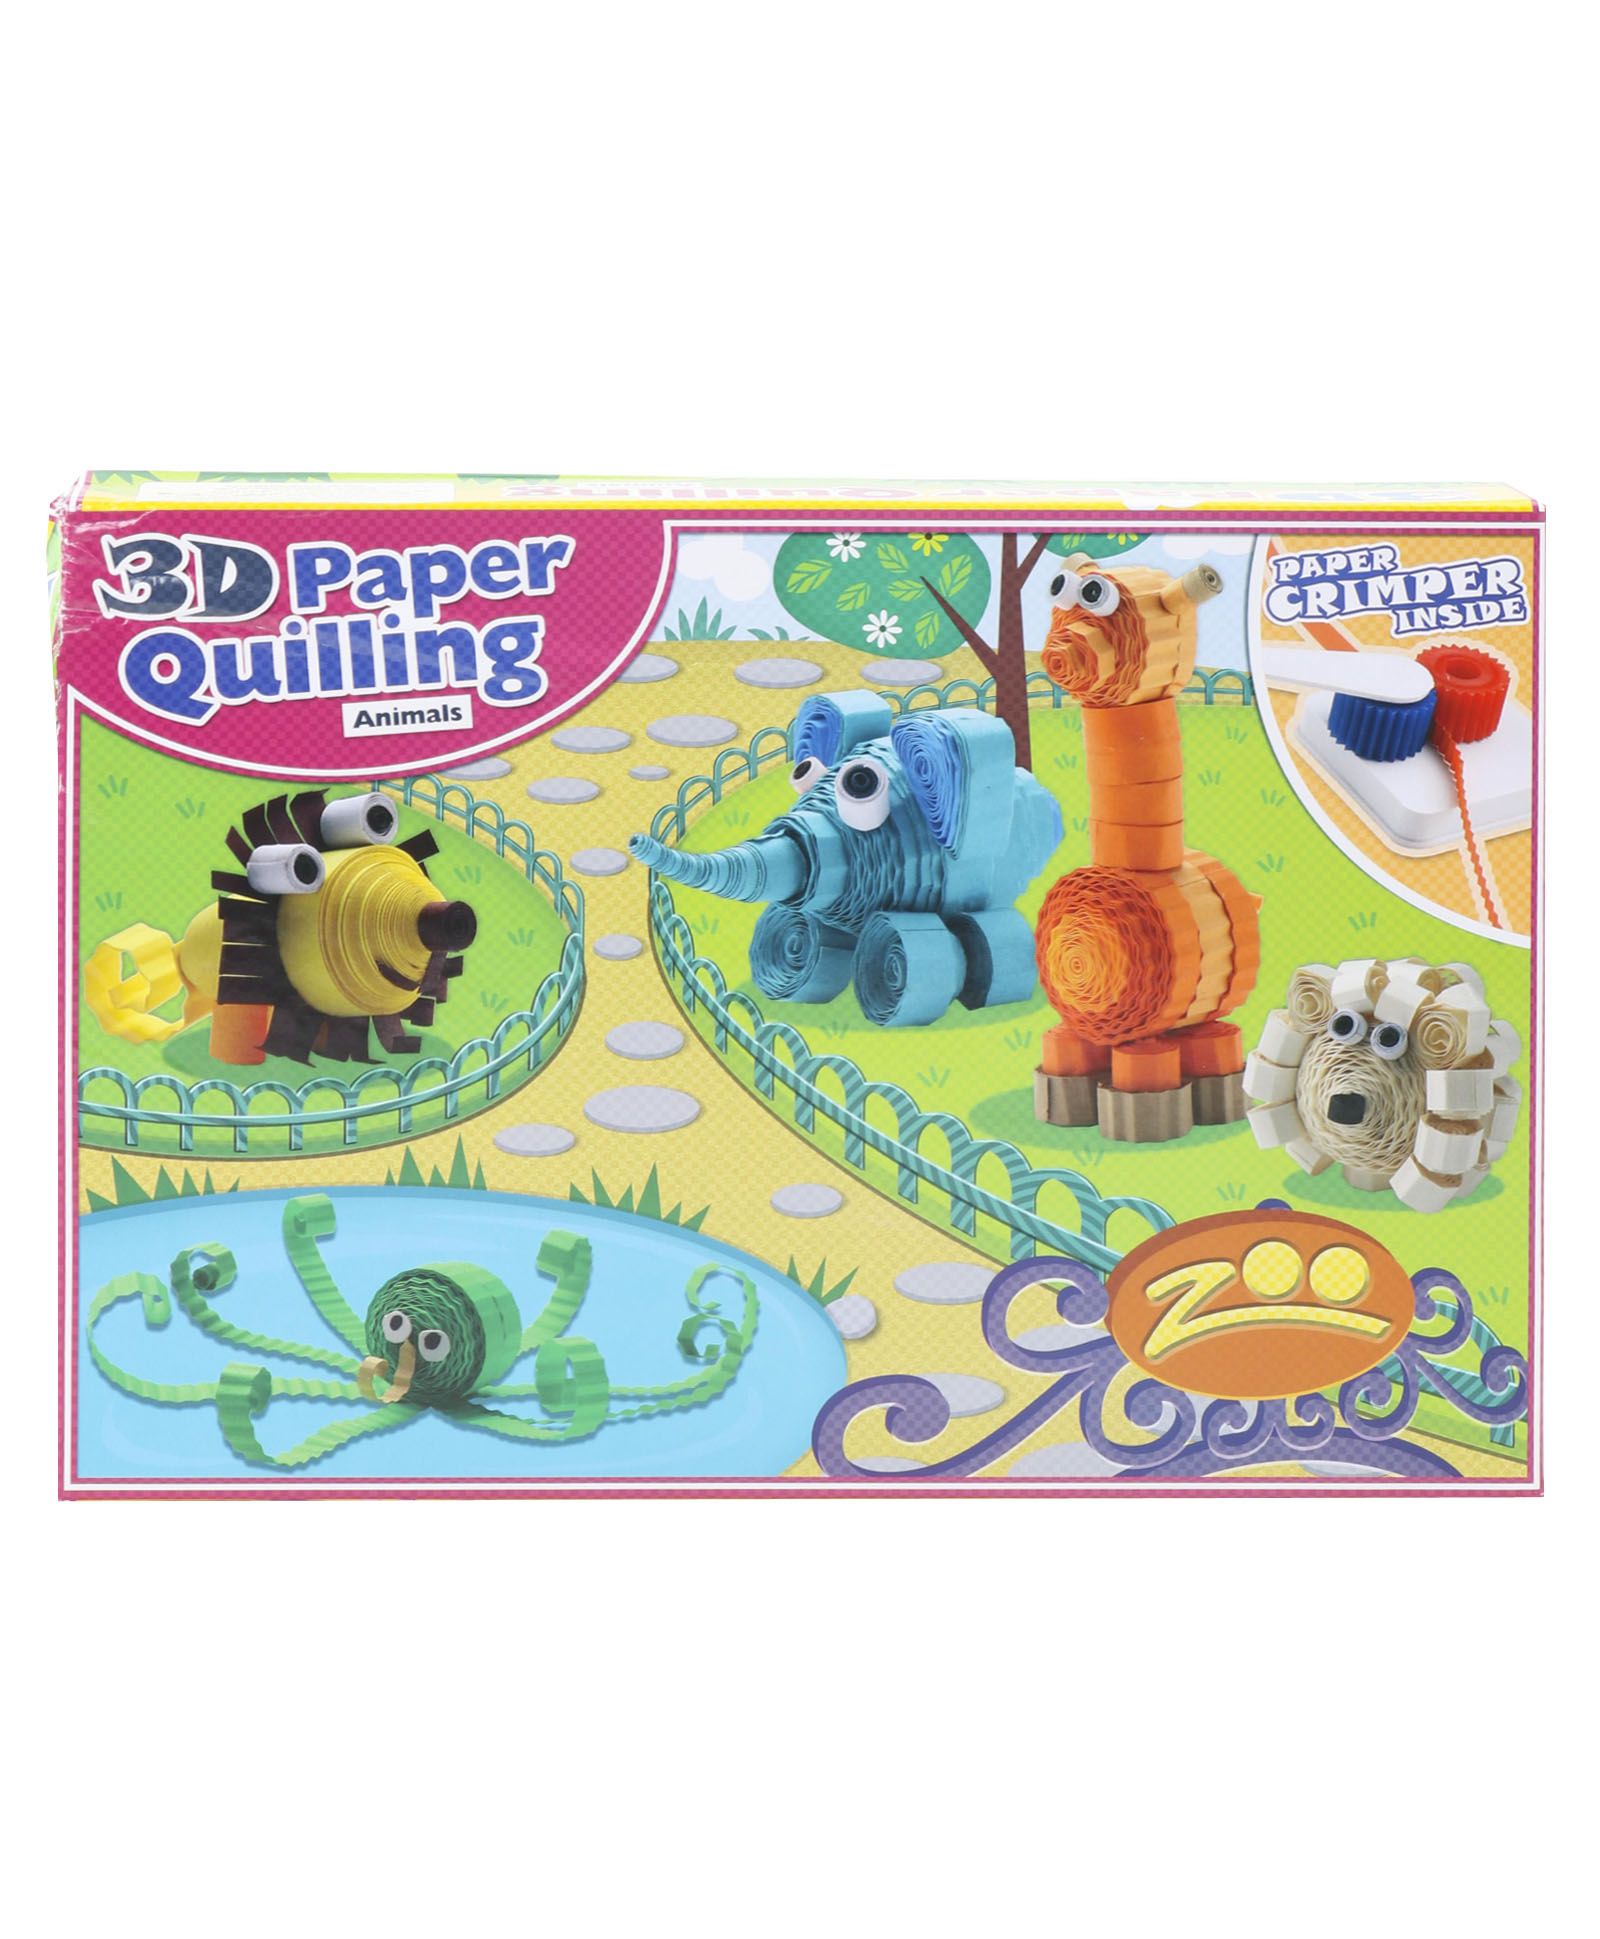 Petals 3D Paper Quilling Animals Making Set - Multicolor Online India, Buy  Art & Creativity Toys for (5-10 Years) at  - 2885705